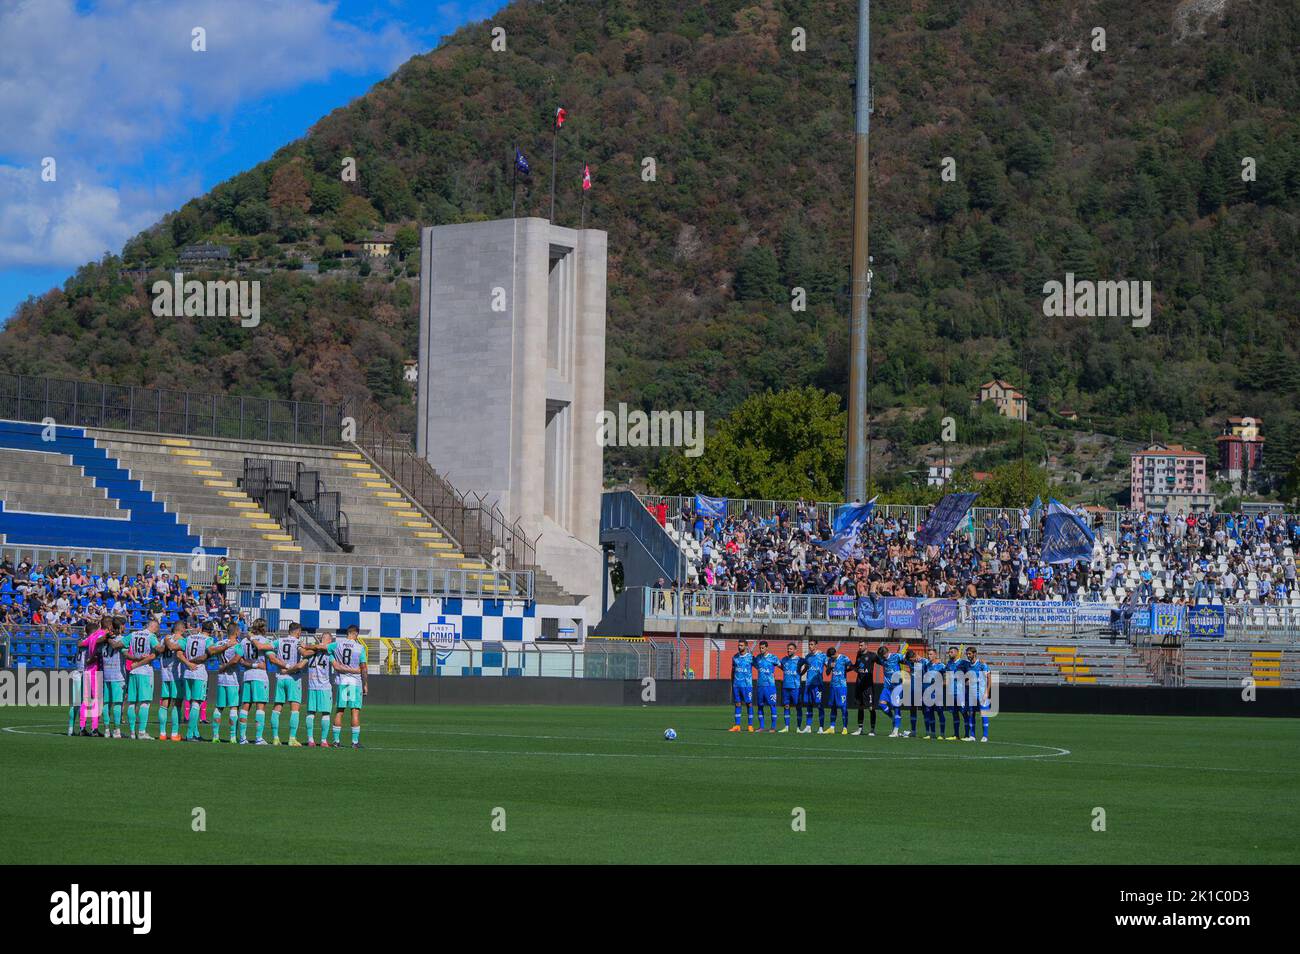 Como Spal enters the pitch during the Italian soccer Serie B match